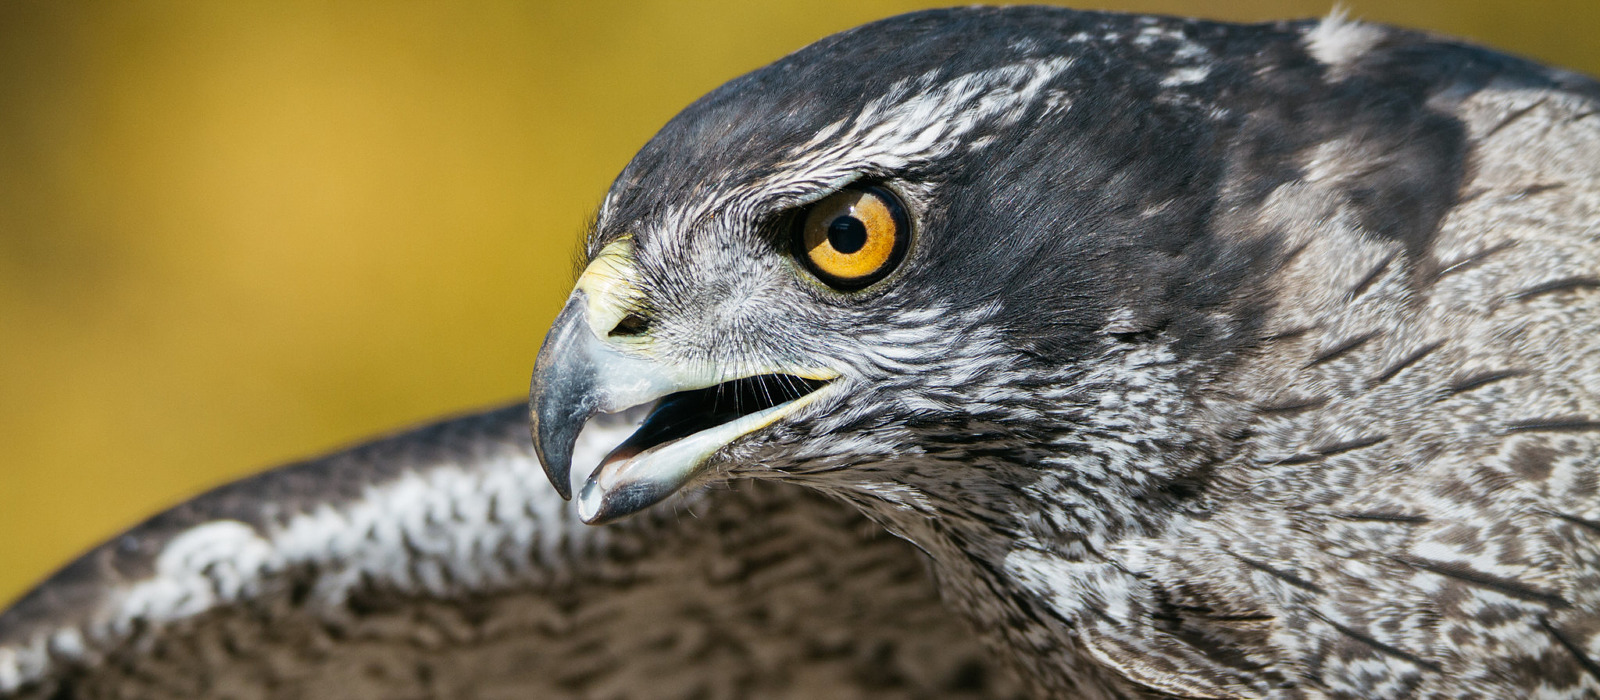 A Northern Goshawk stares intently. (photo © Emilie Chen via the Flickr Creative Commons)